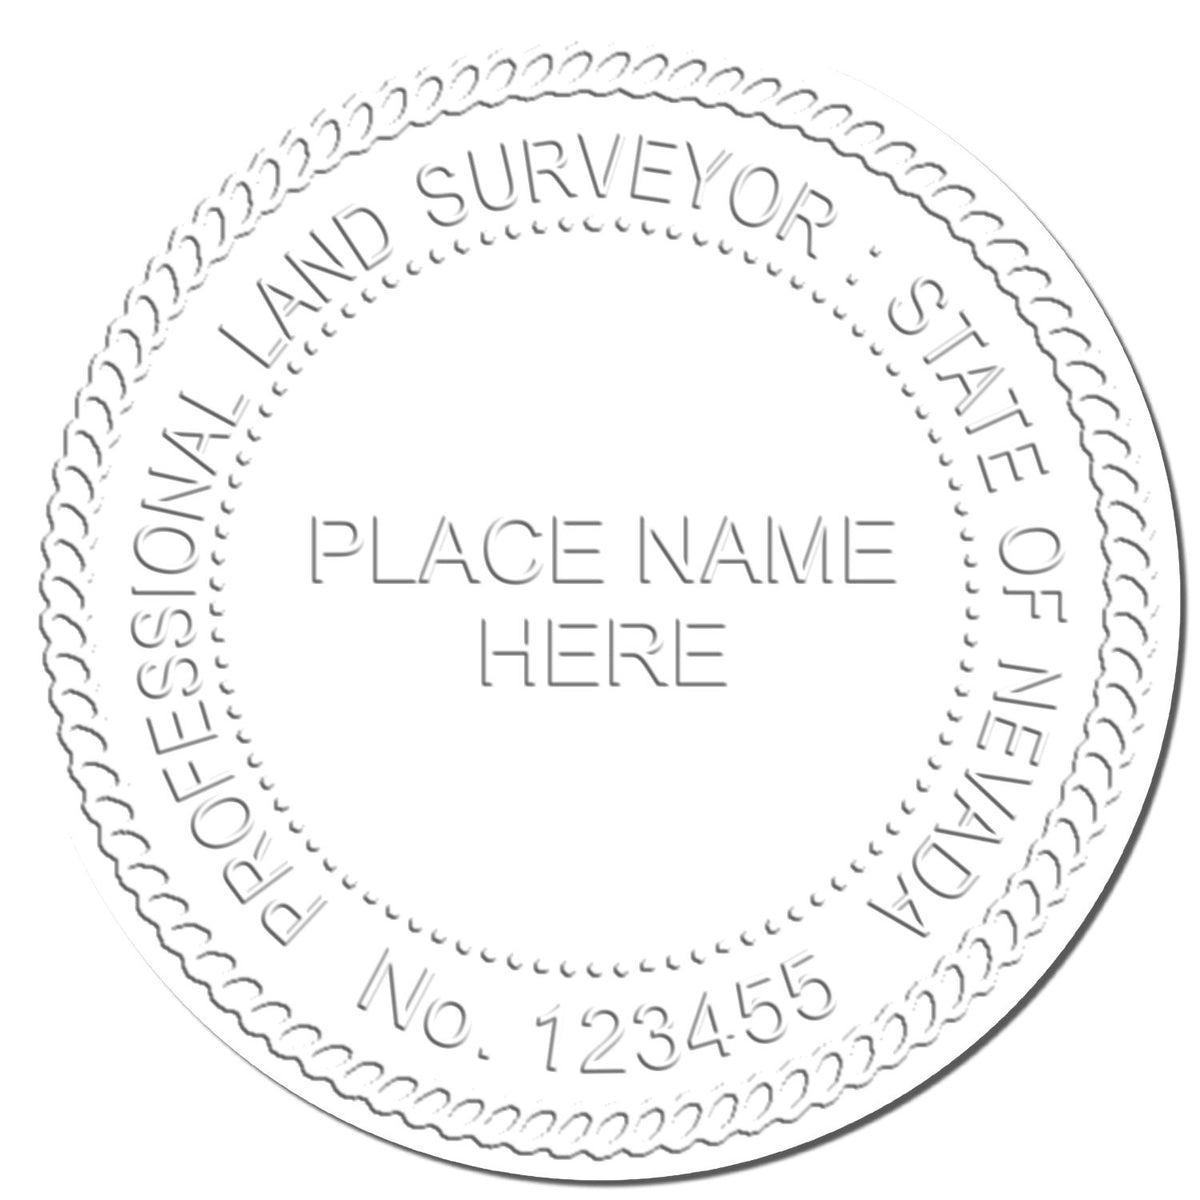 This paper is stamped with a sample imprint of the Extended Long Reach Nevada Surveyor Embosser, signifying its quality and reliability.